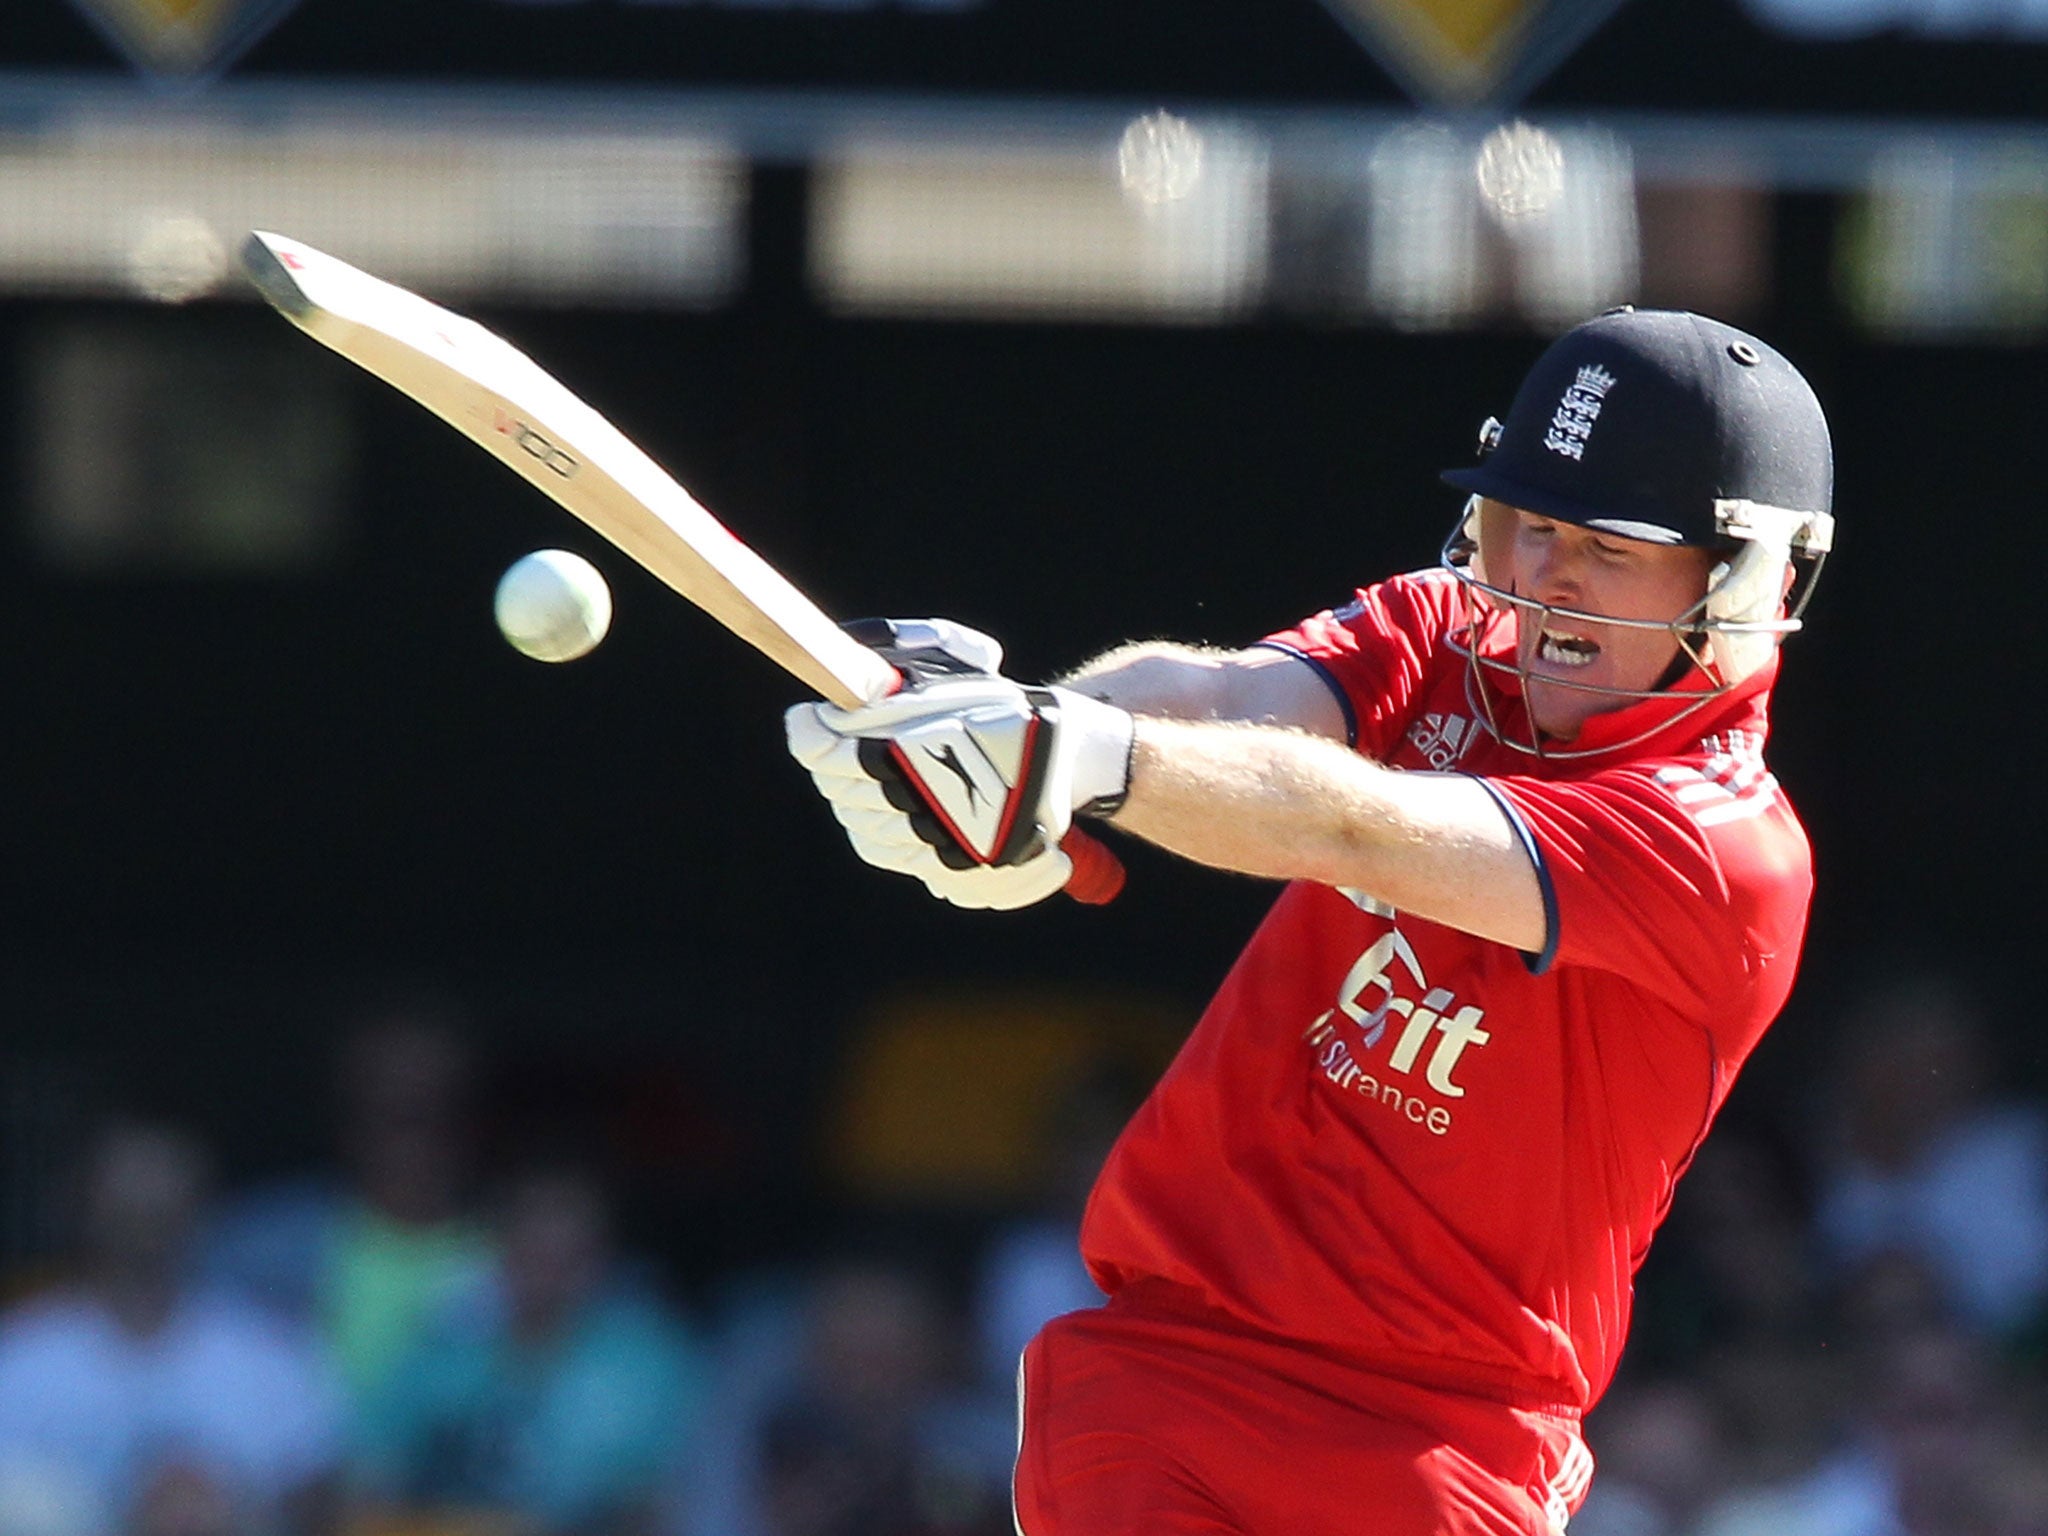 England's centurion Eoin Morgan may miss Saturday's match with a calf injury